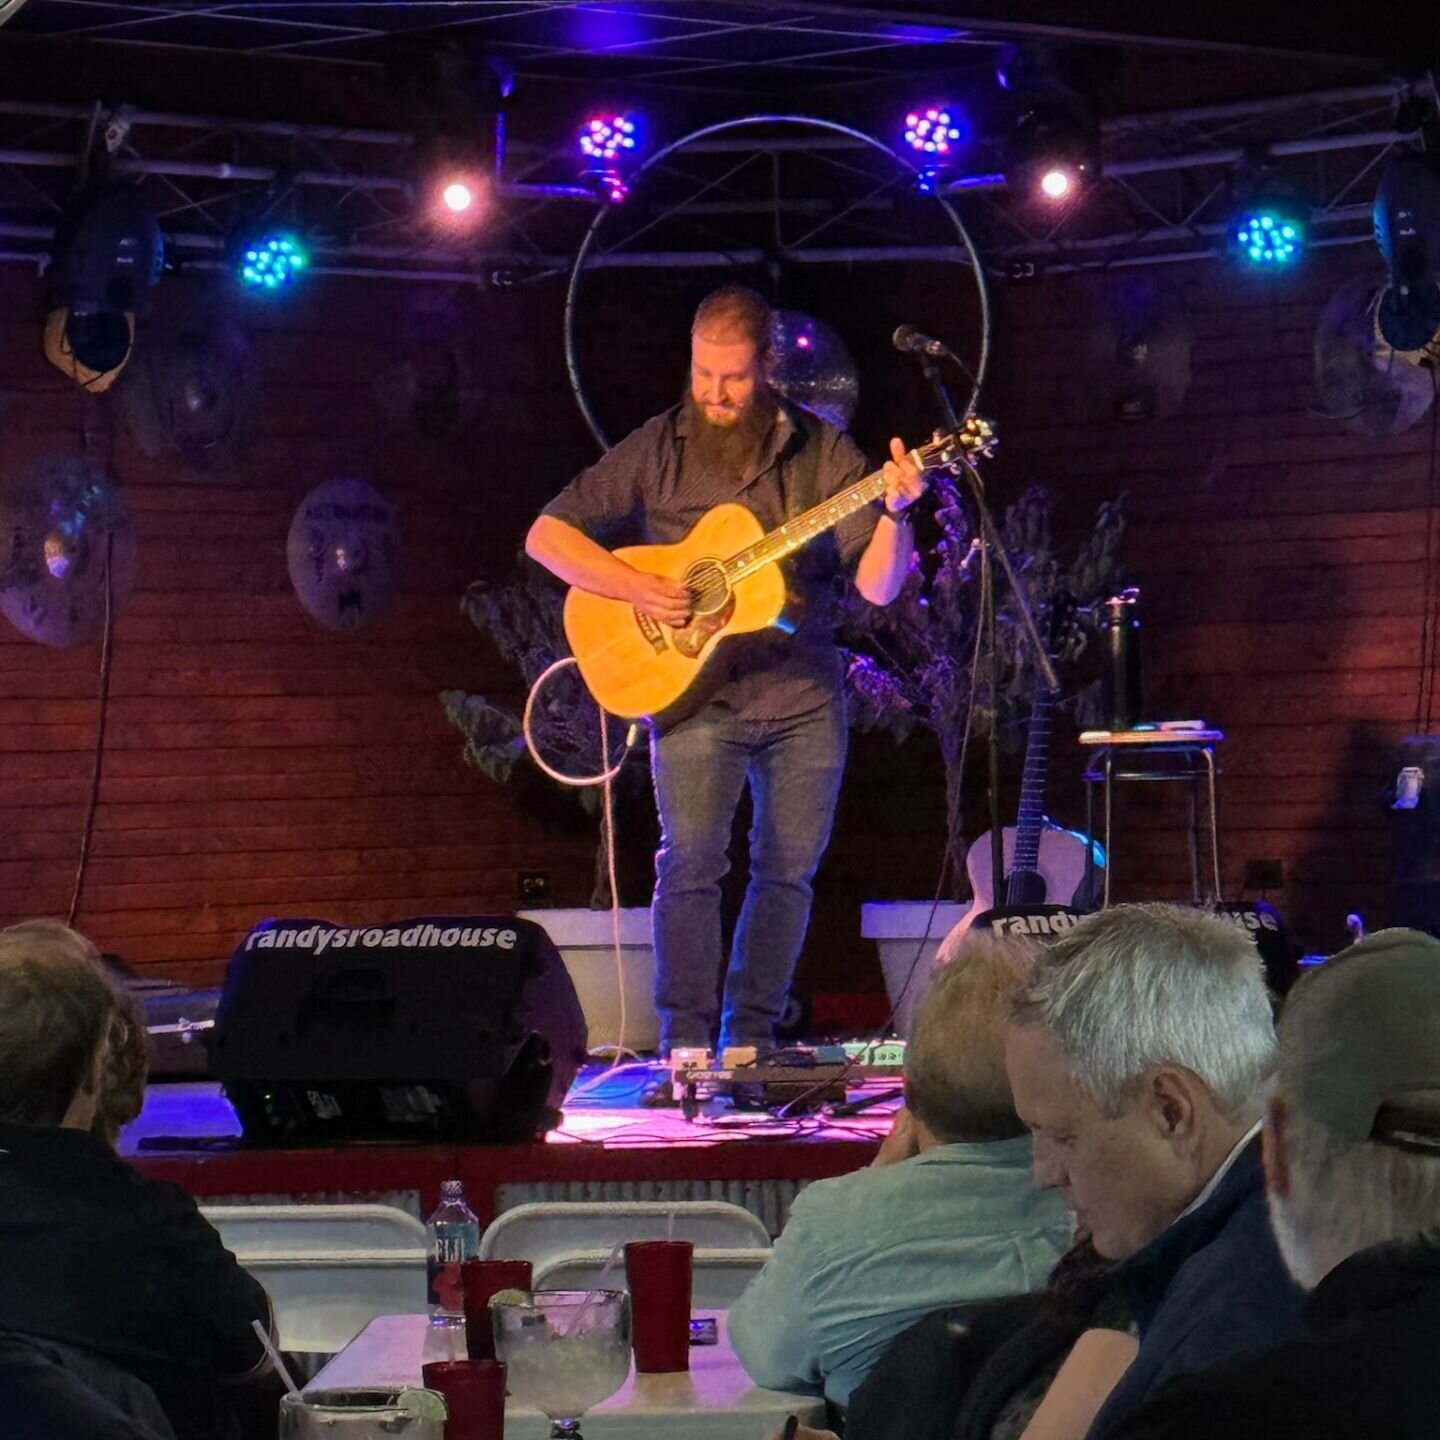 Had a great show on Sunday. Thanks to everyone who came to the concert! I also got a couple of surprises. I am officially on the wall of Randy's Roadhouse and shout-out to @django.amadeus.oconnell for bringing his 1867 Martin for me to try out. Amazi